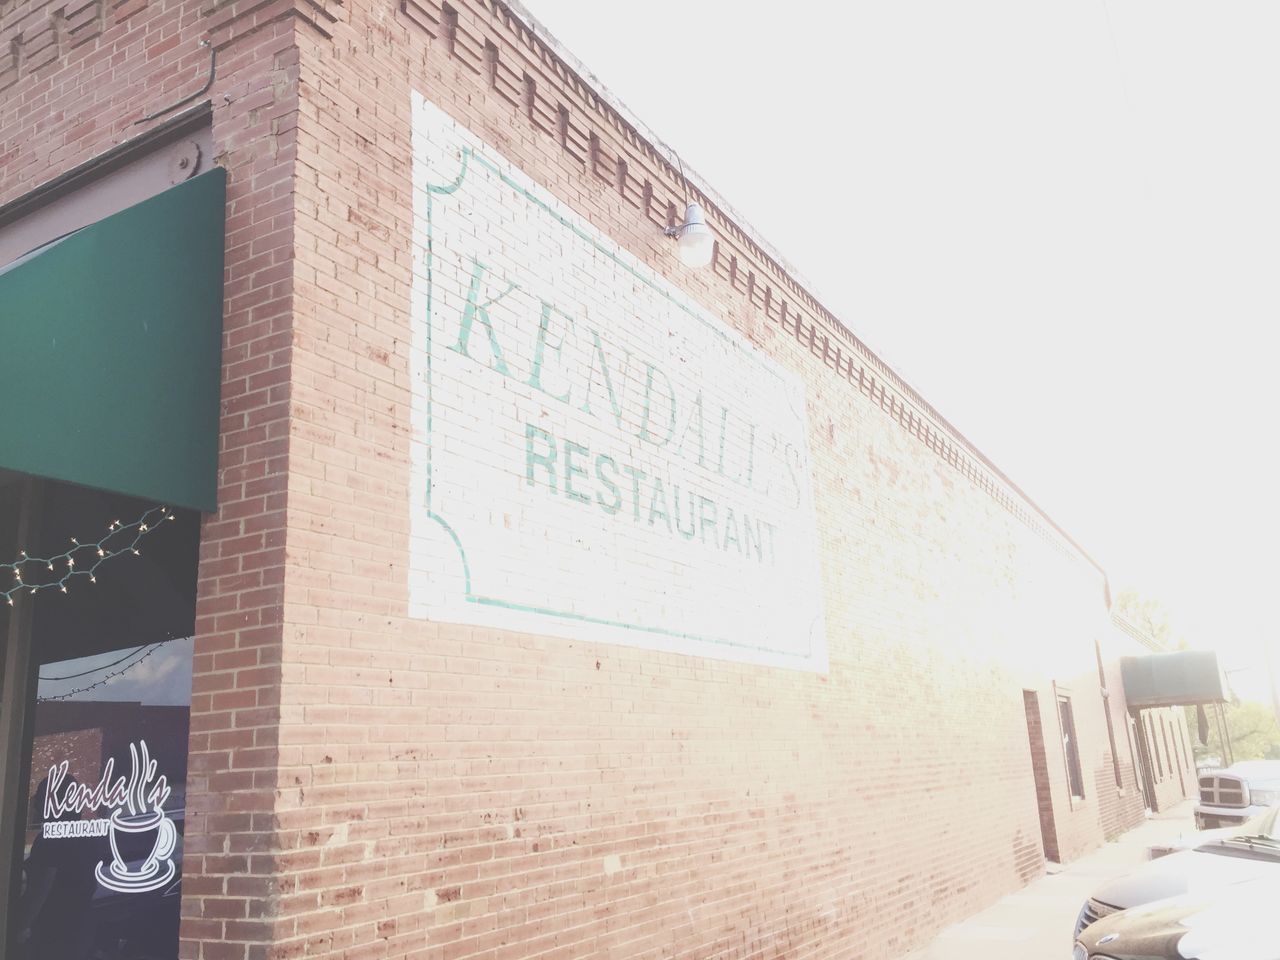 Kendall's